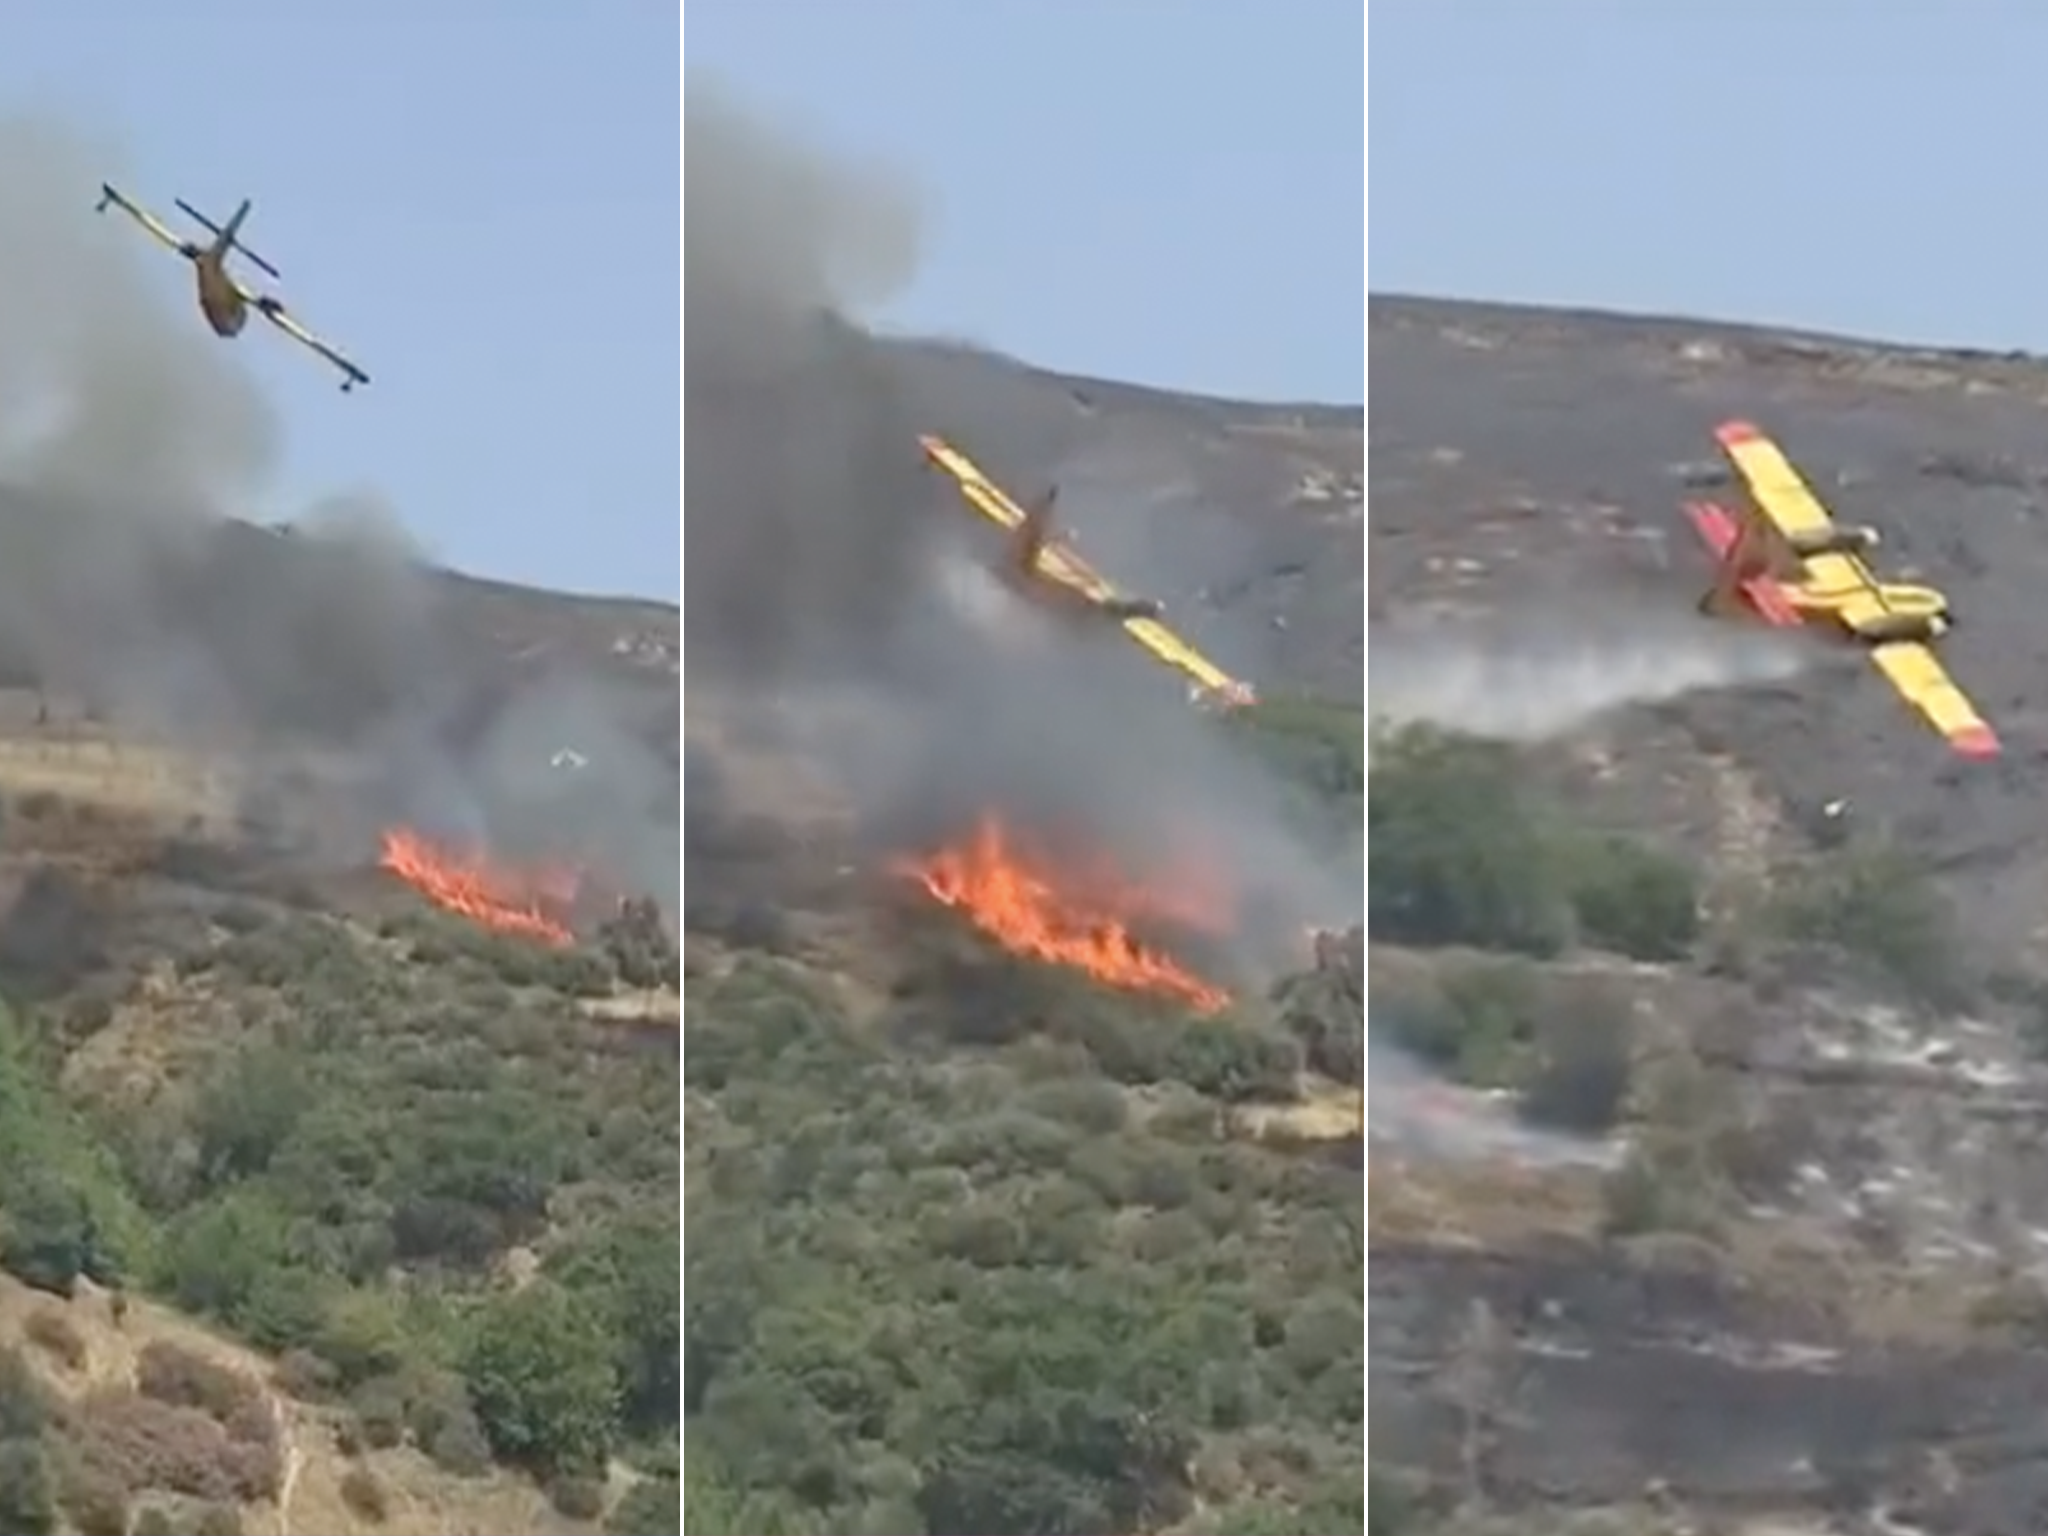 Live television pictures captured the crash of a firefighting plane near Platanistos, on the island of Evia, Greece